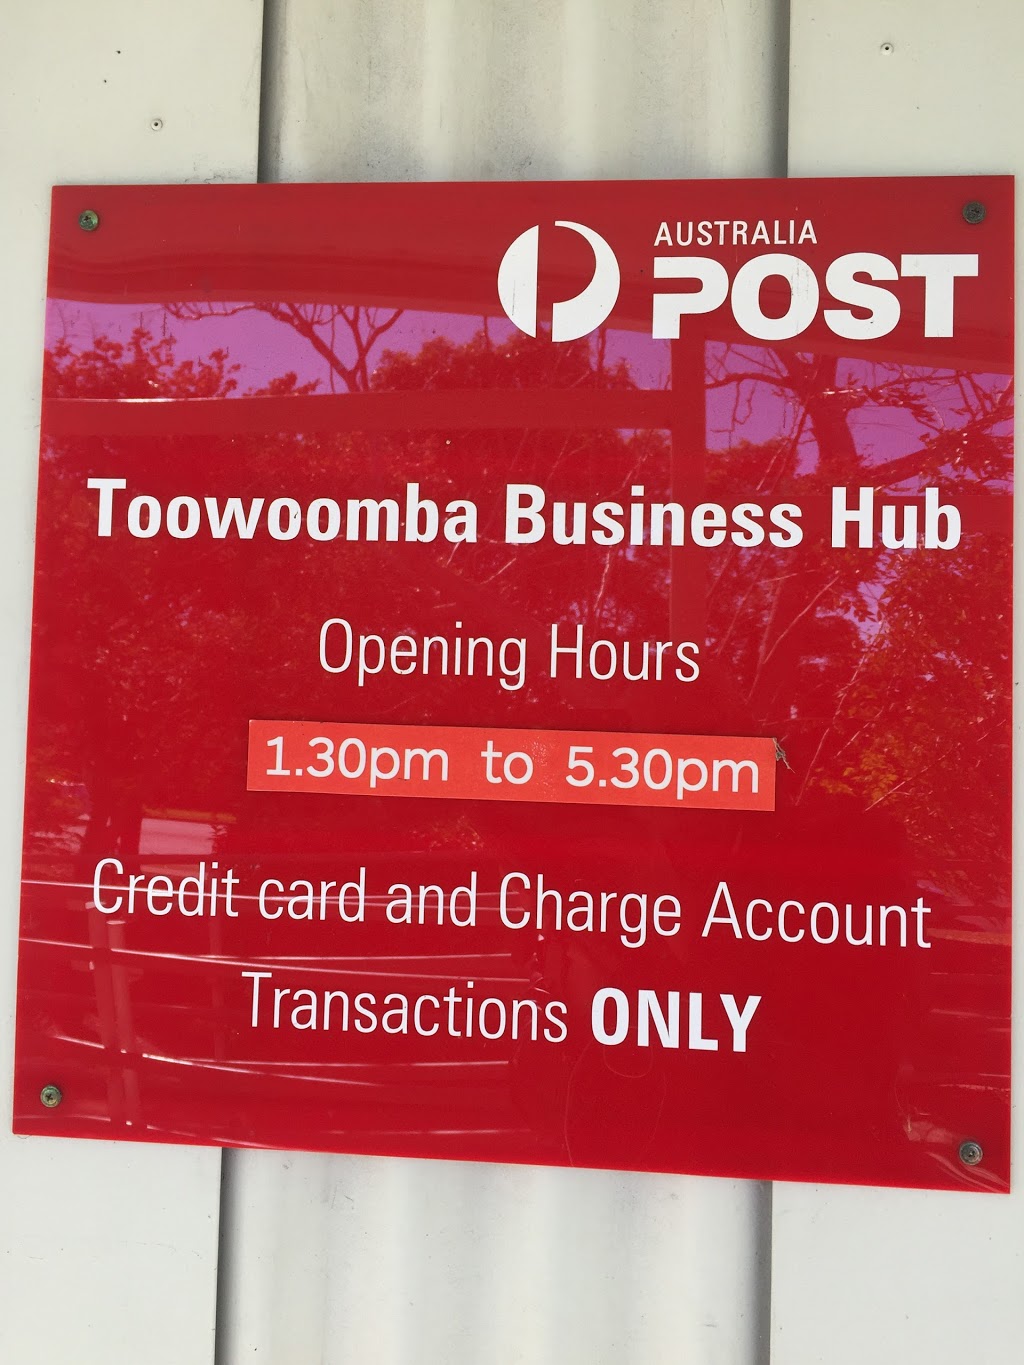 Australia Post - Toowoomba Business Centre (330 Stenner St) Opening Hours